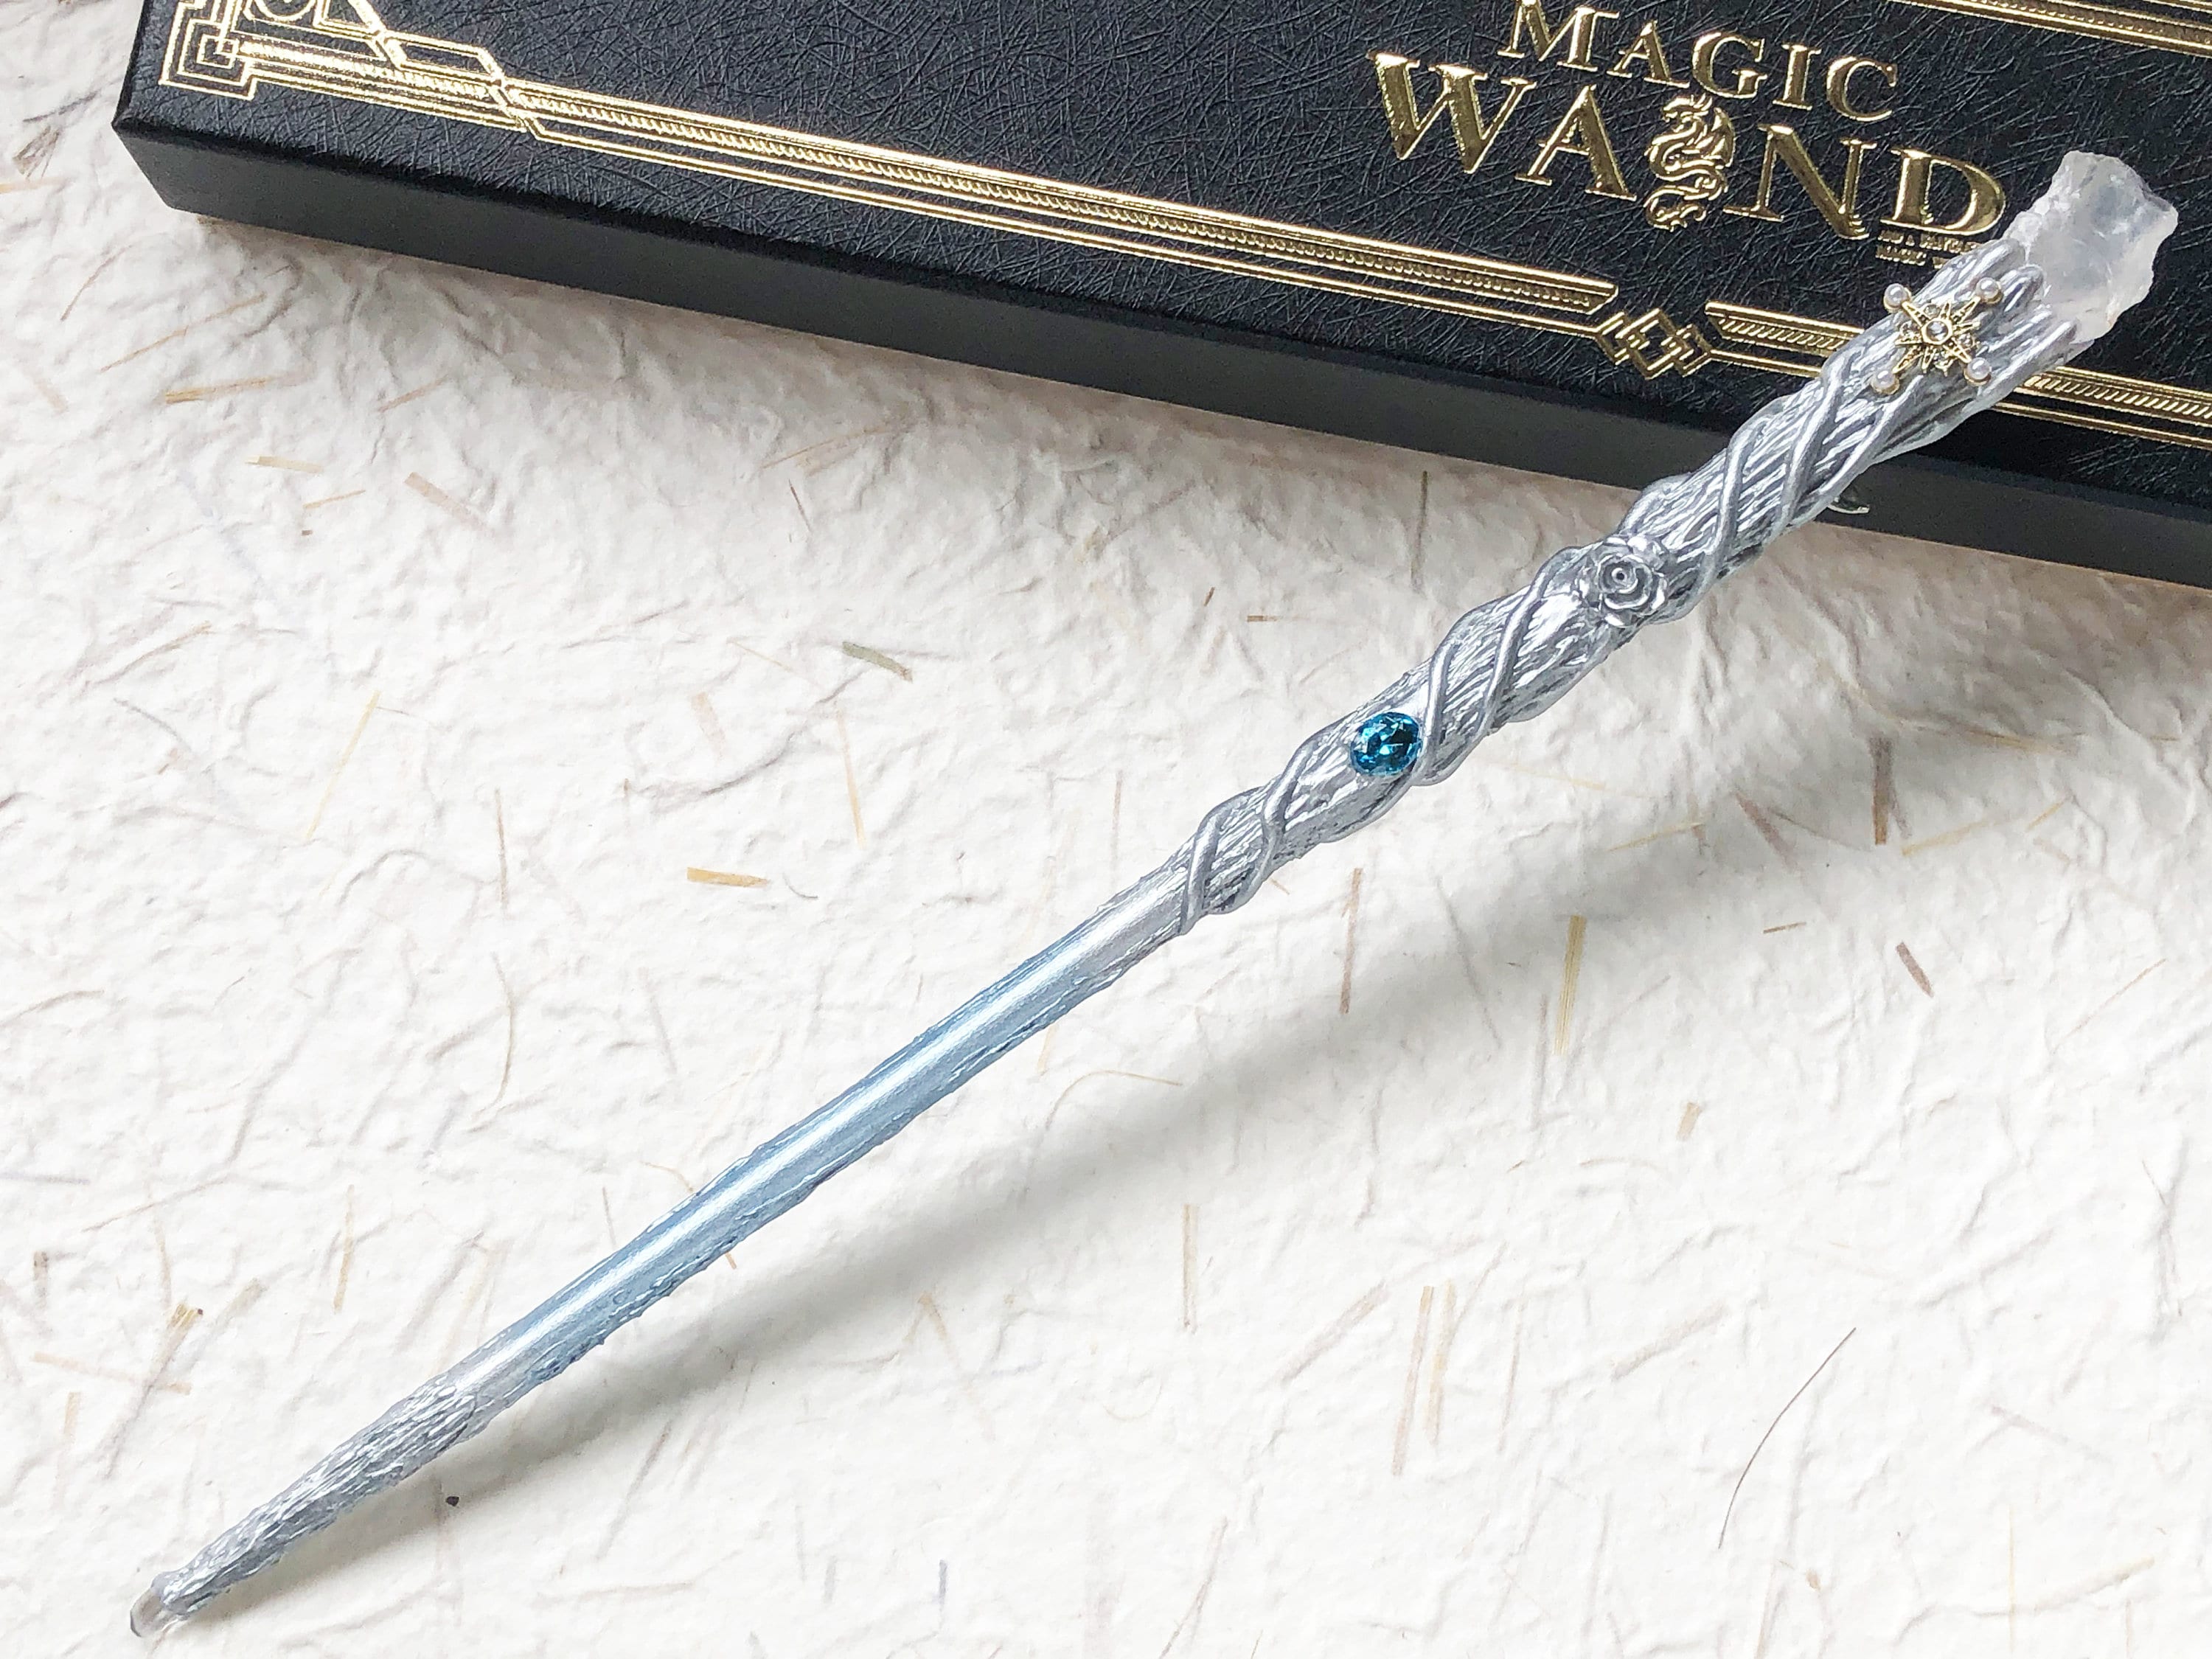 Crystal Magic Wand Cosplay Party Witch Alter Witchcraft Supply Wicca  Accessories